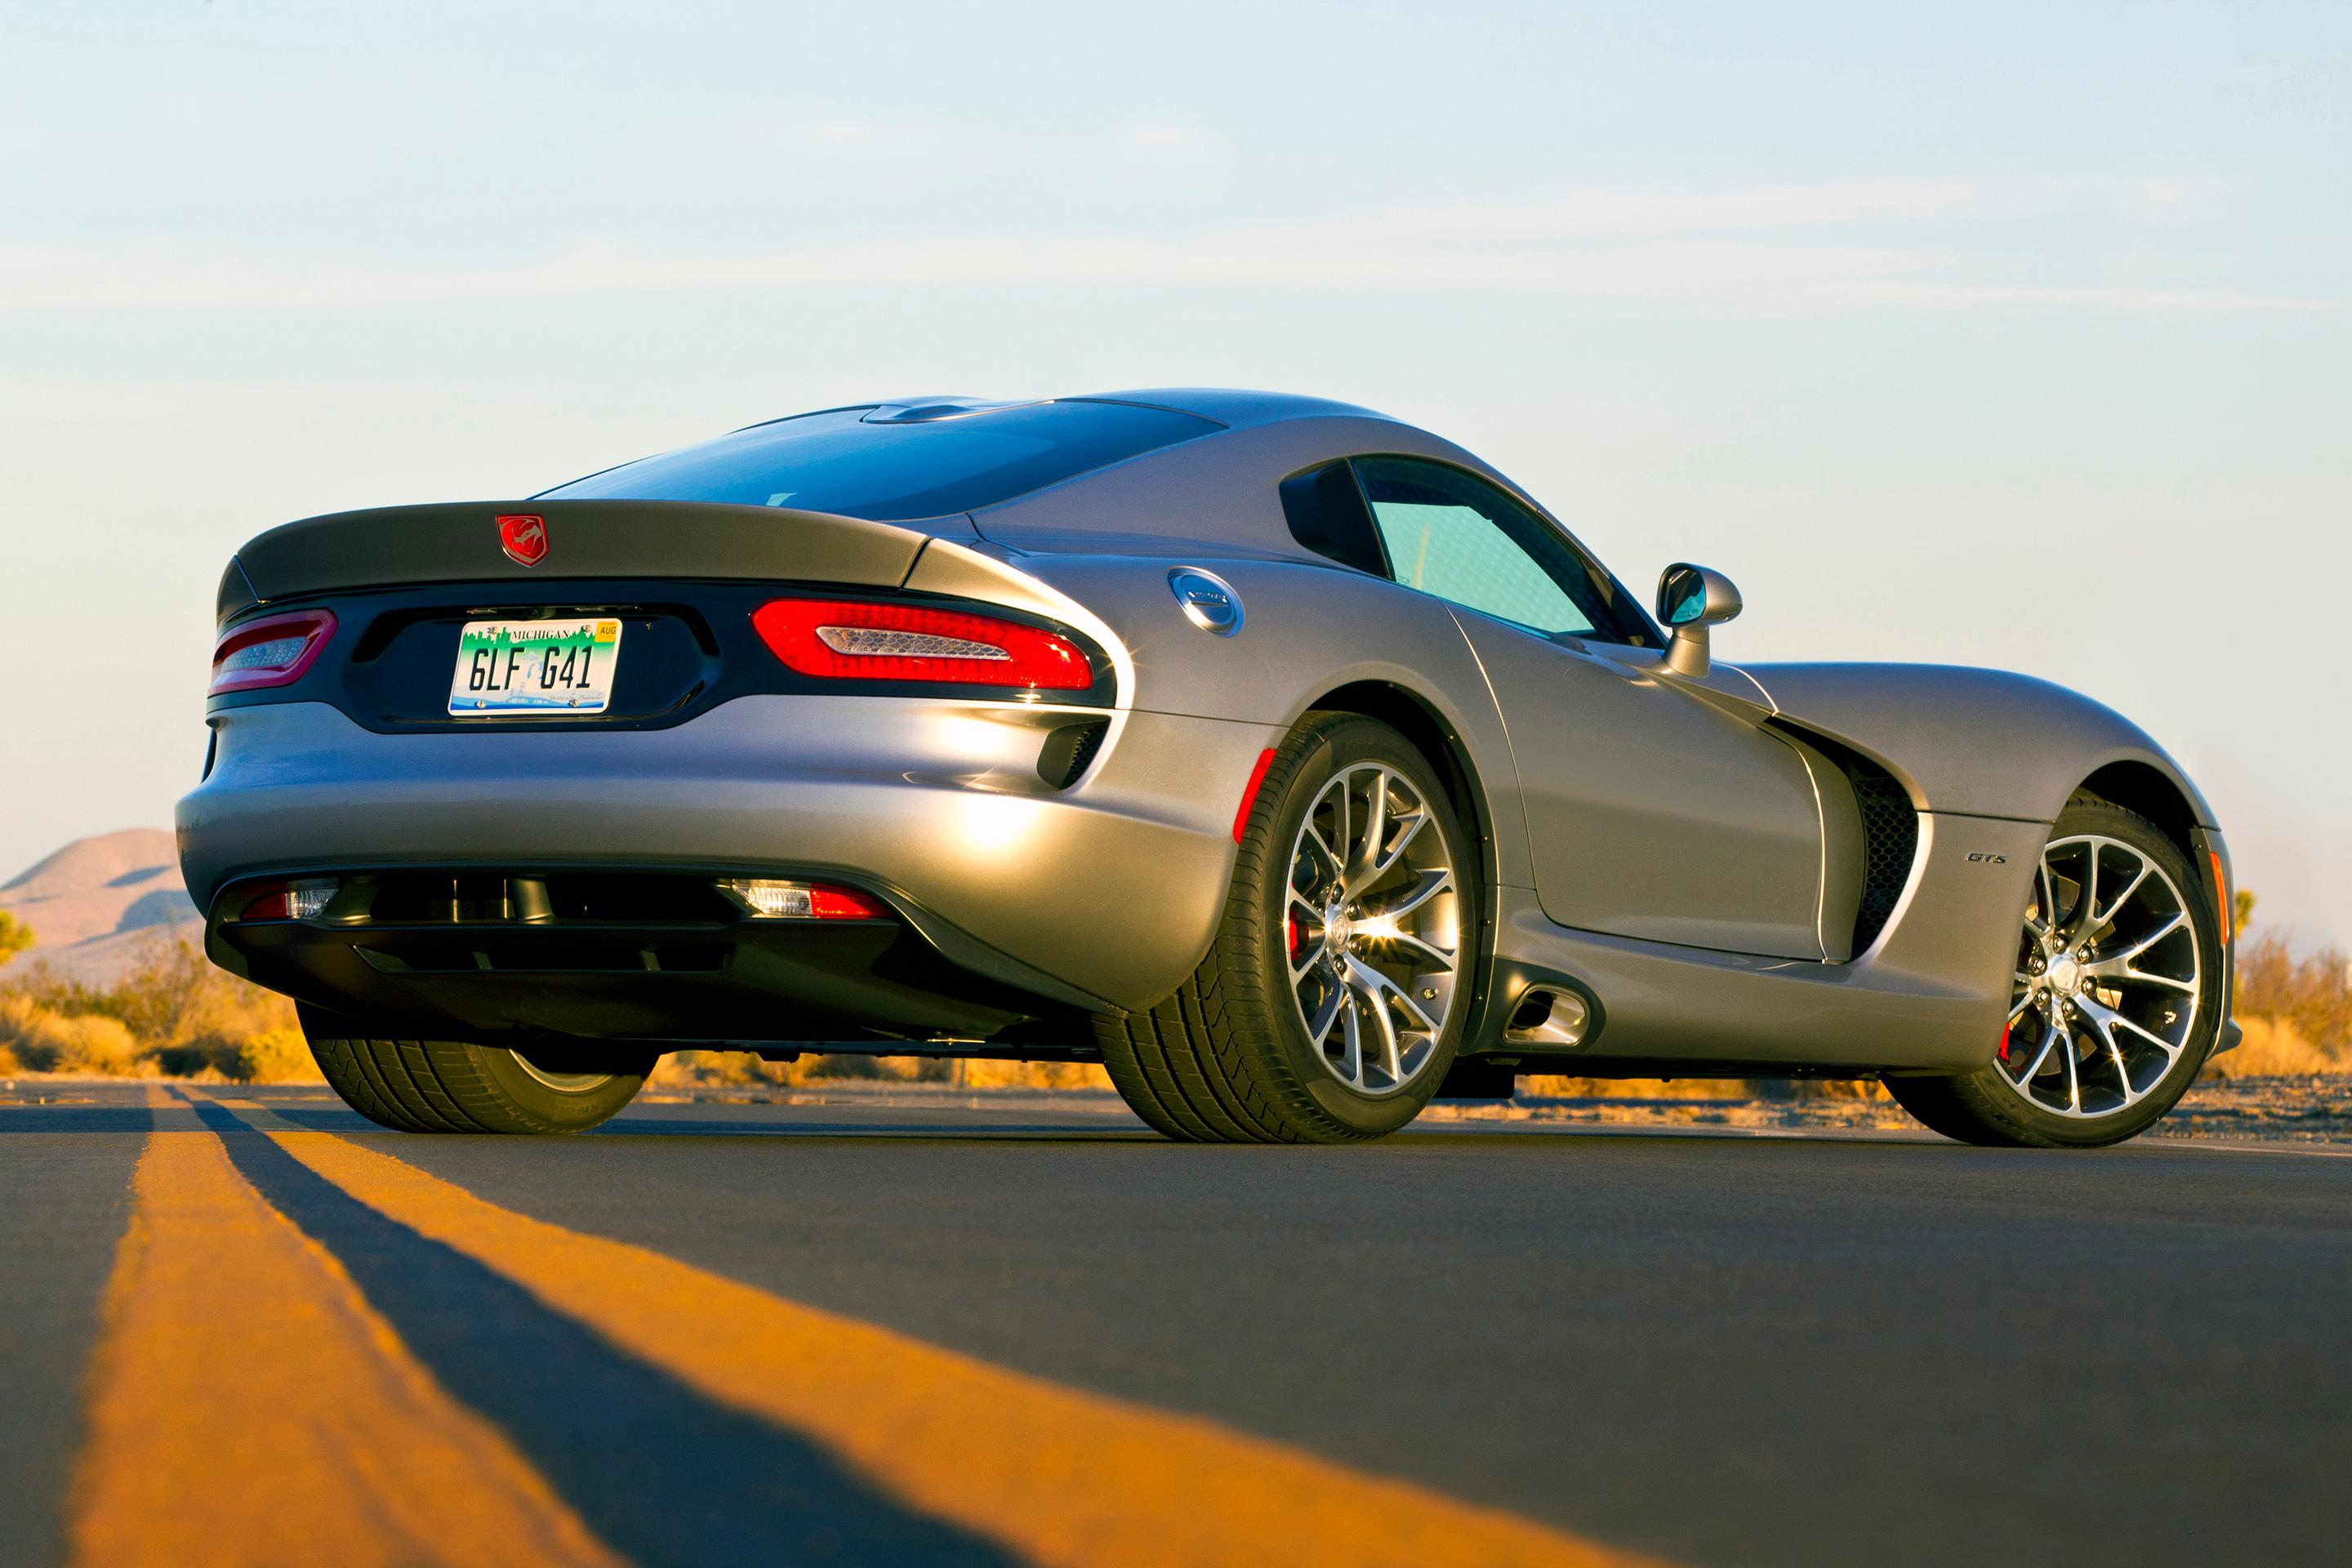 Dodge updates 2015 Viper with more power and mid-level GT model